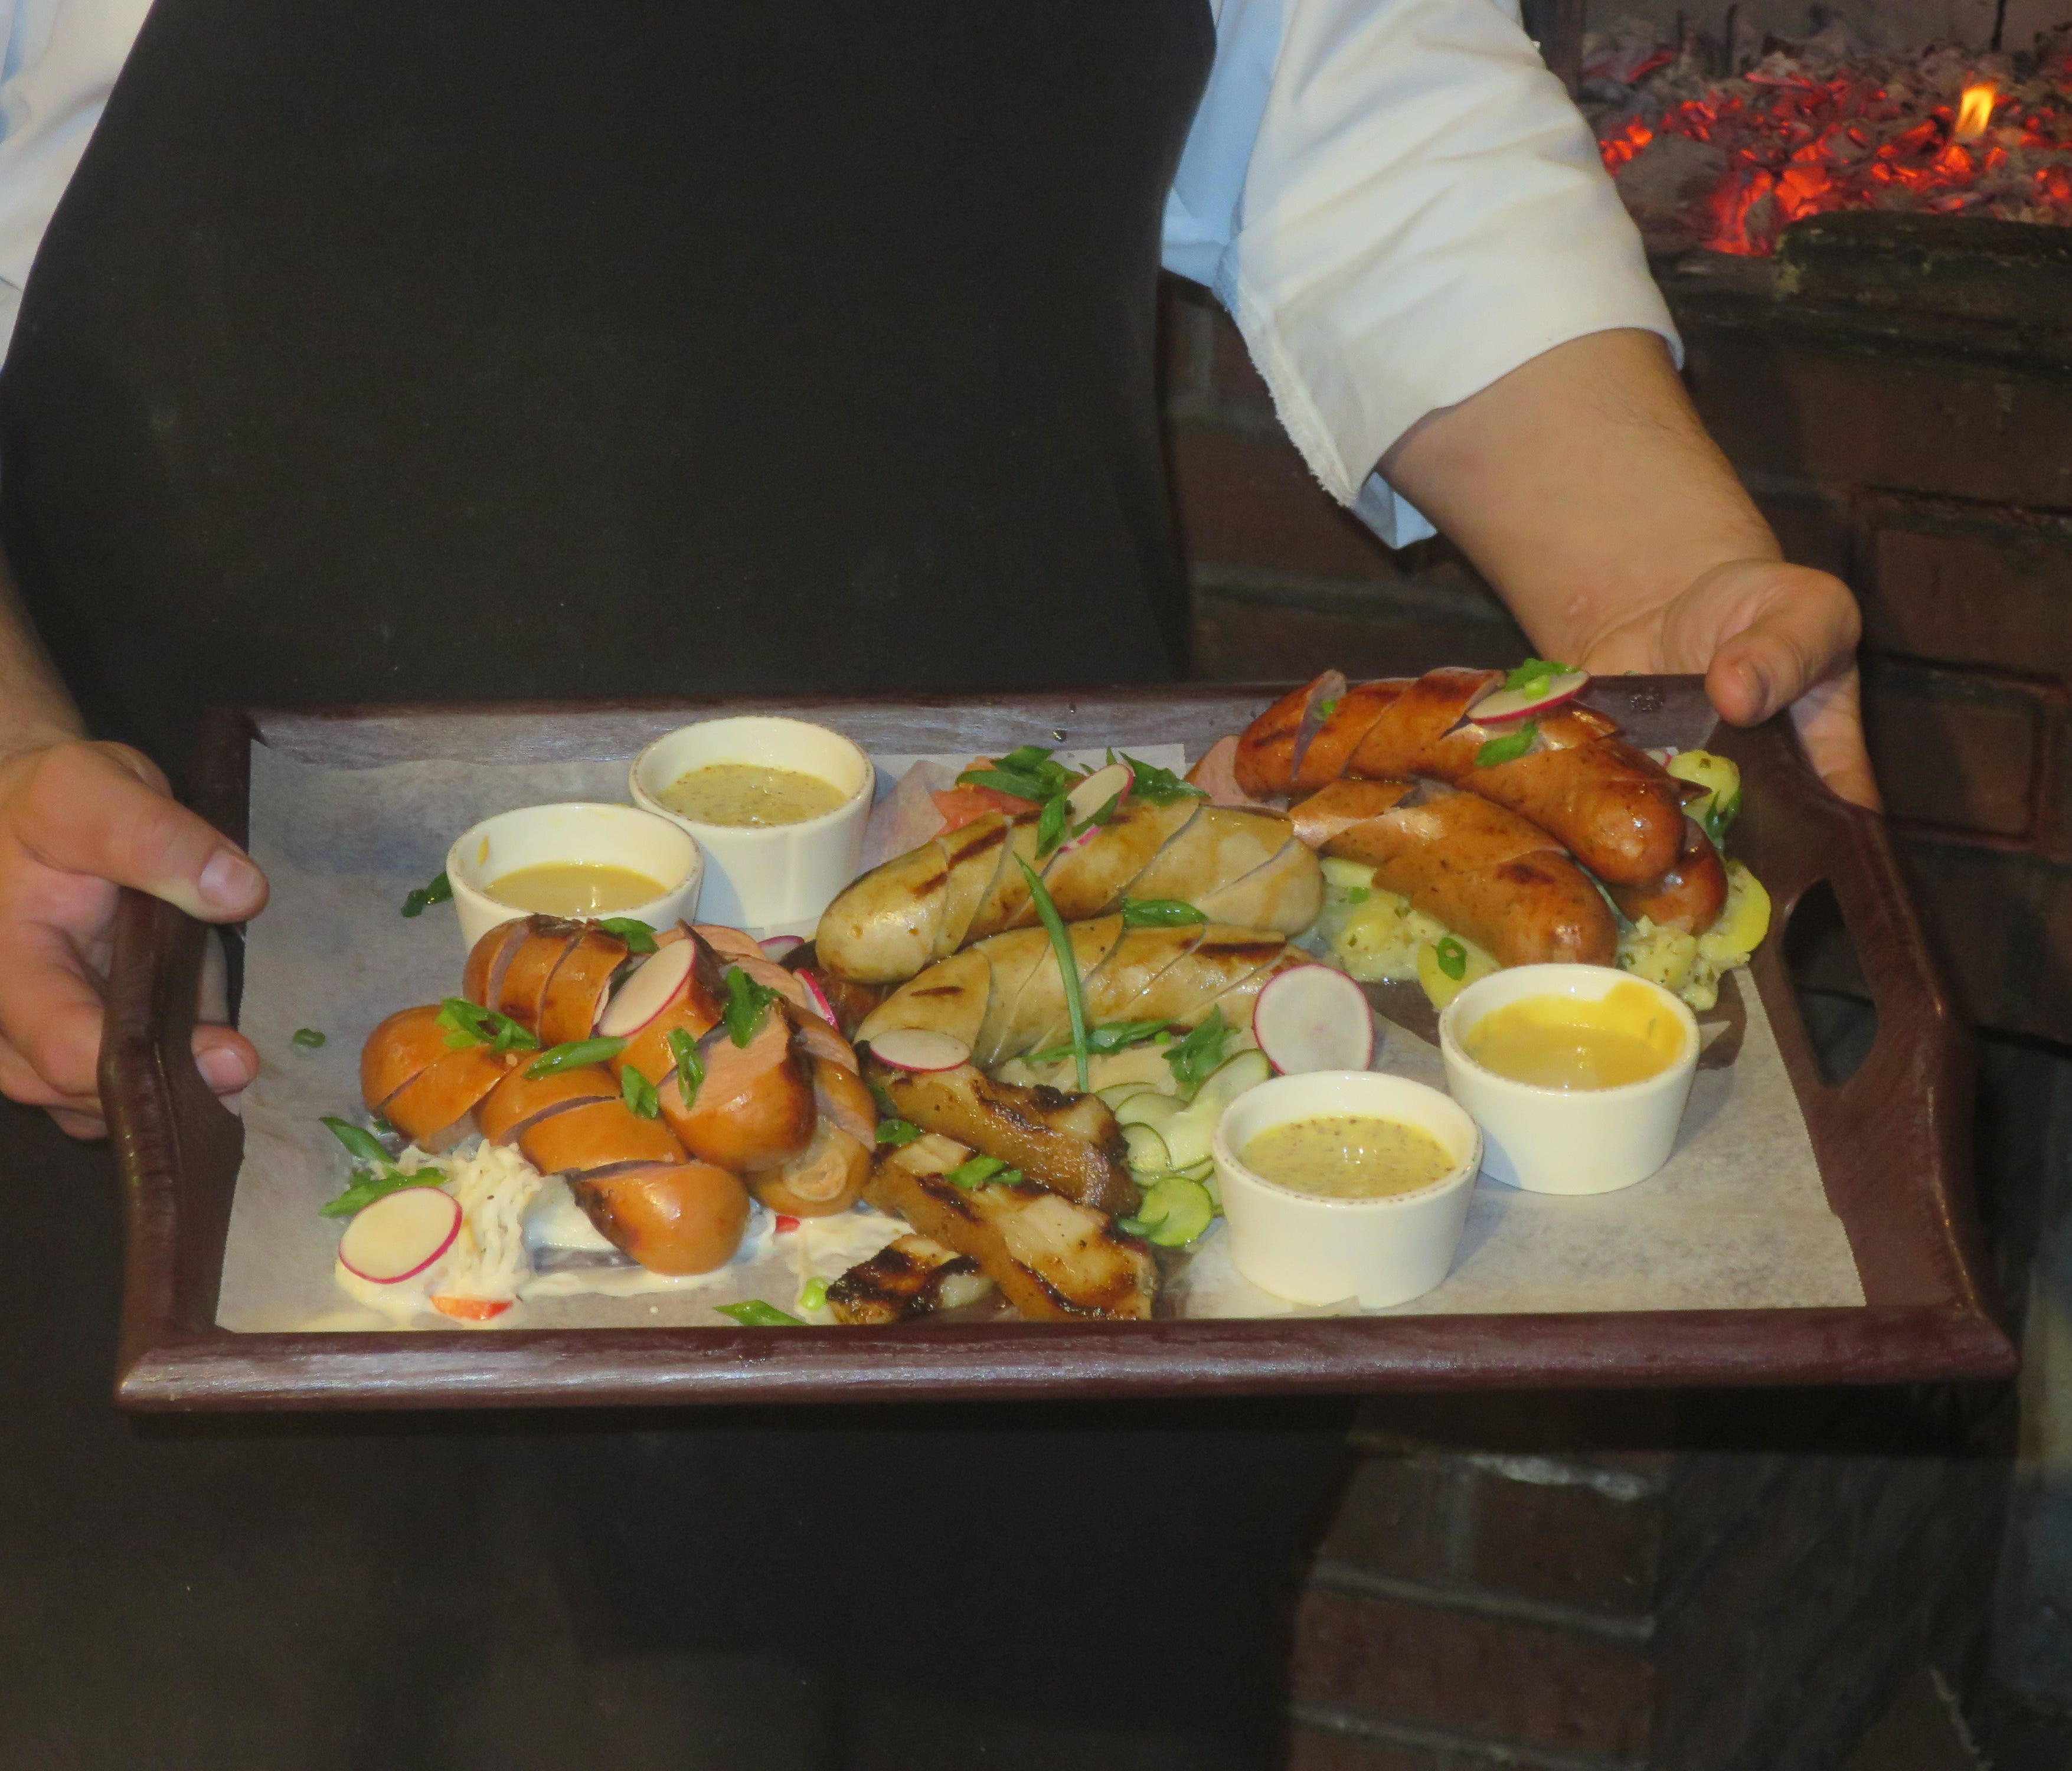 The Grilled Meat Platter is an array of wurst sausages and pork jowl.